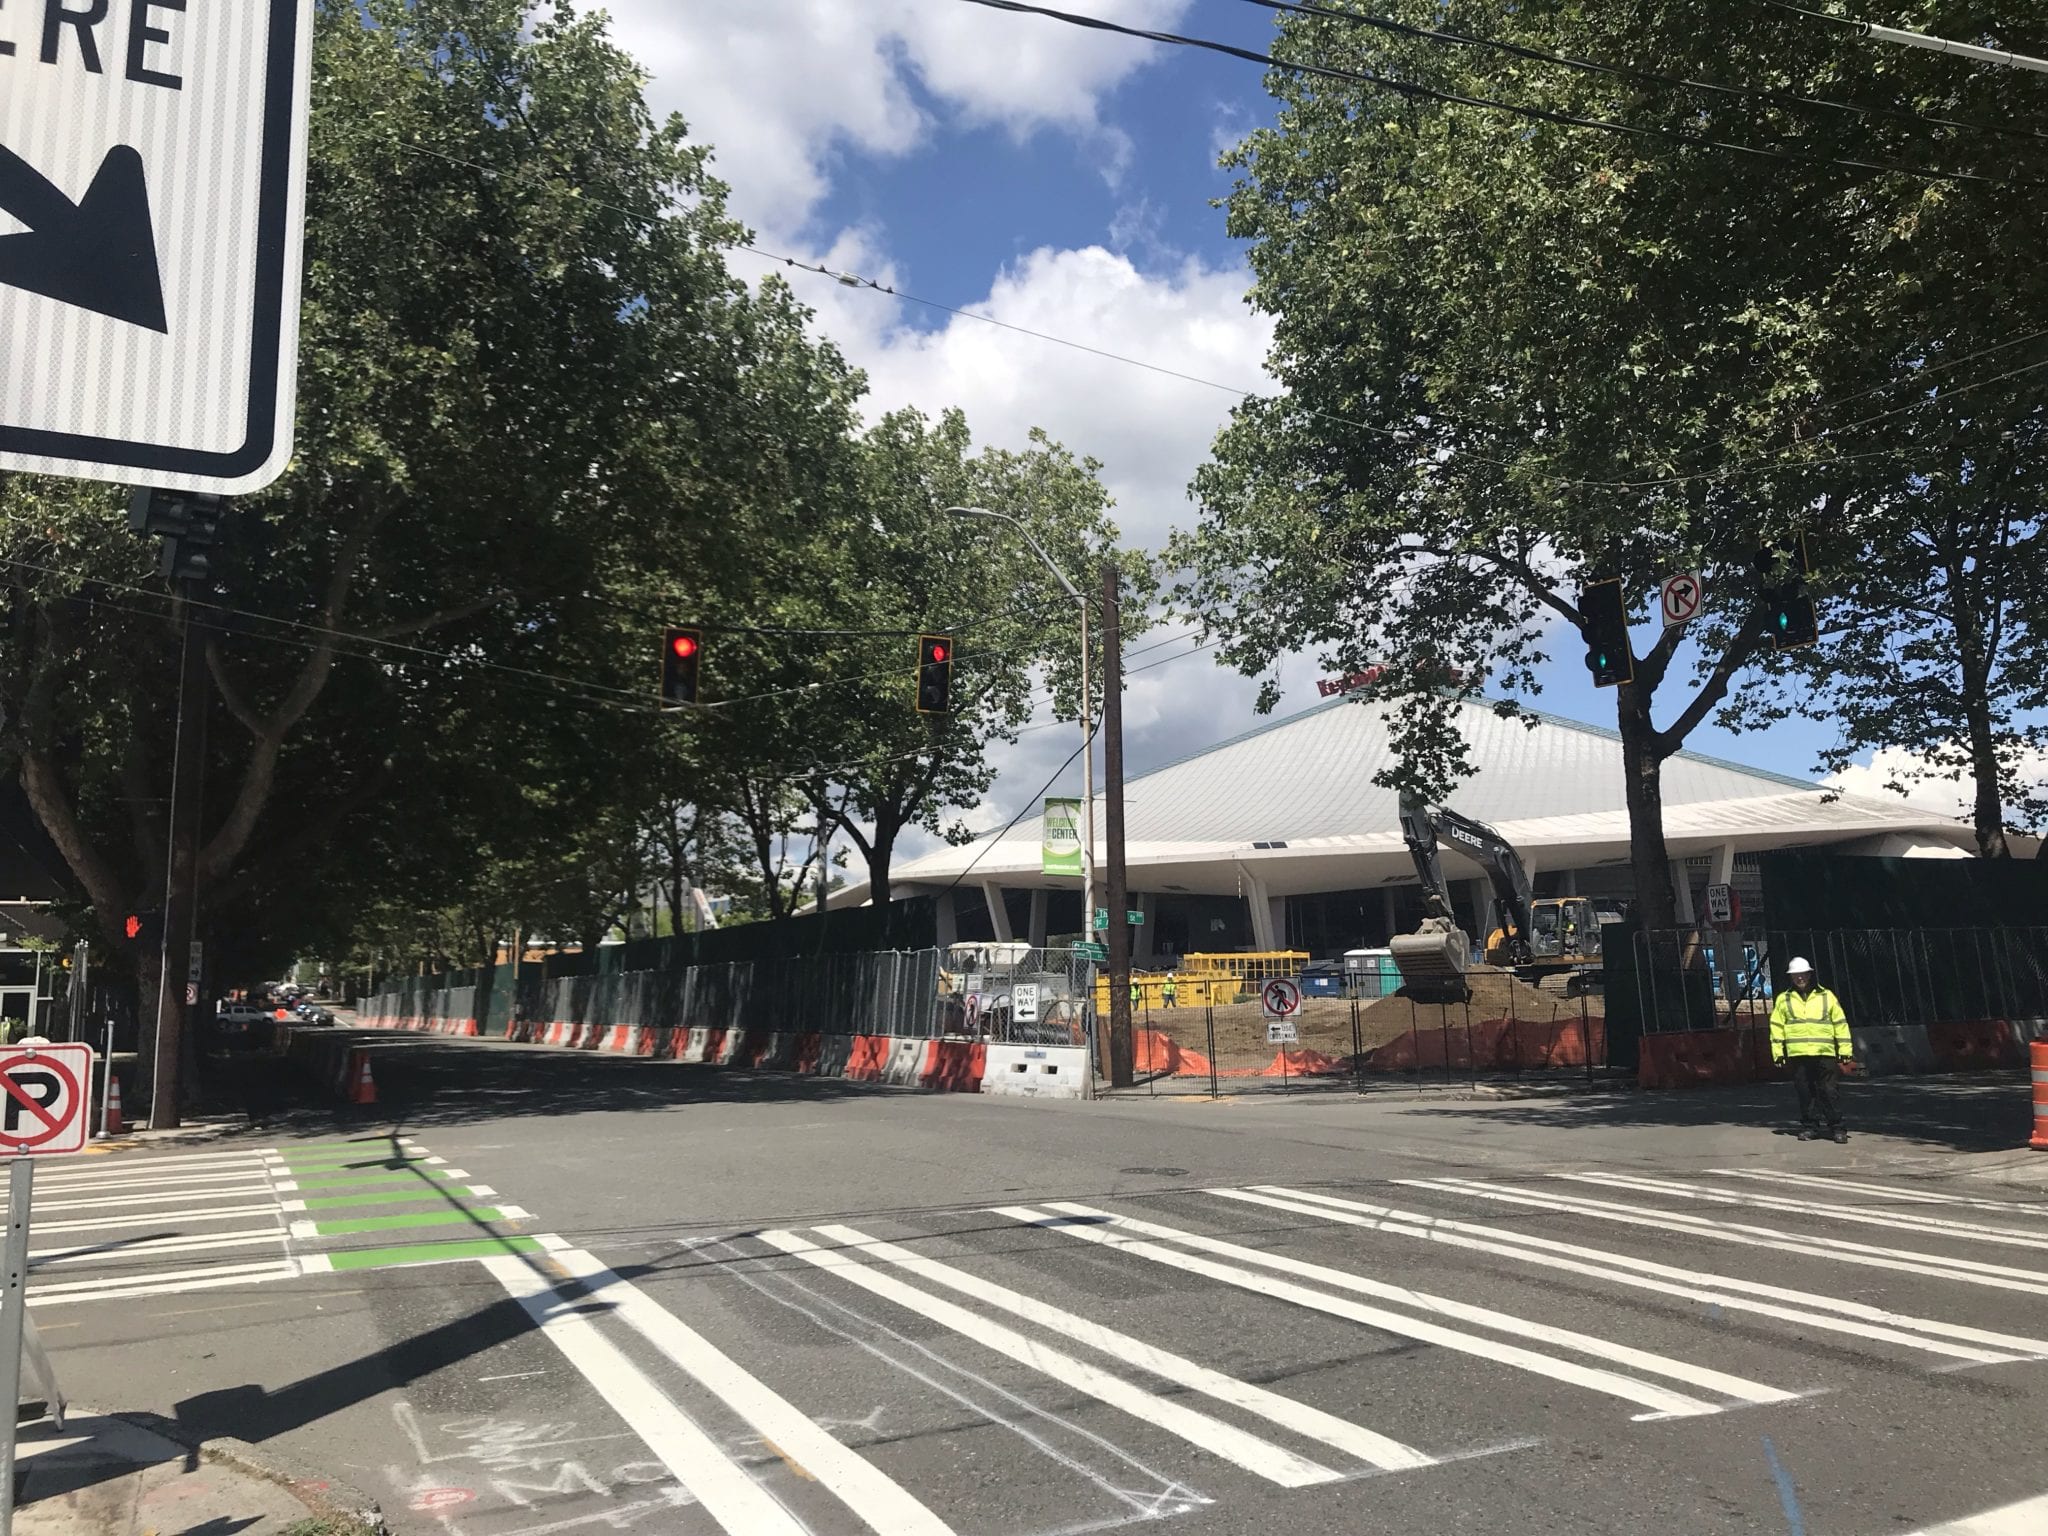 A new traffic signal on 1st Ave N next to the Seattle Center Arena